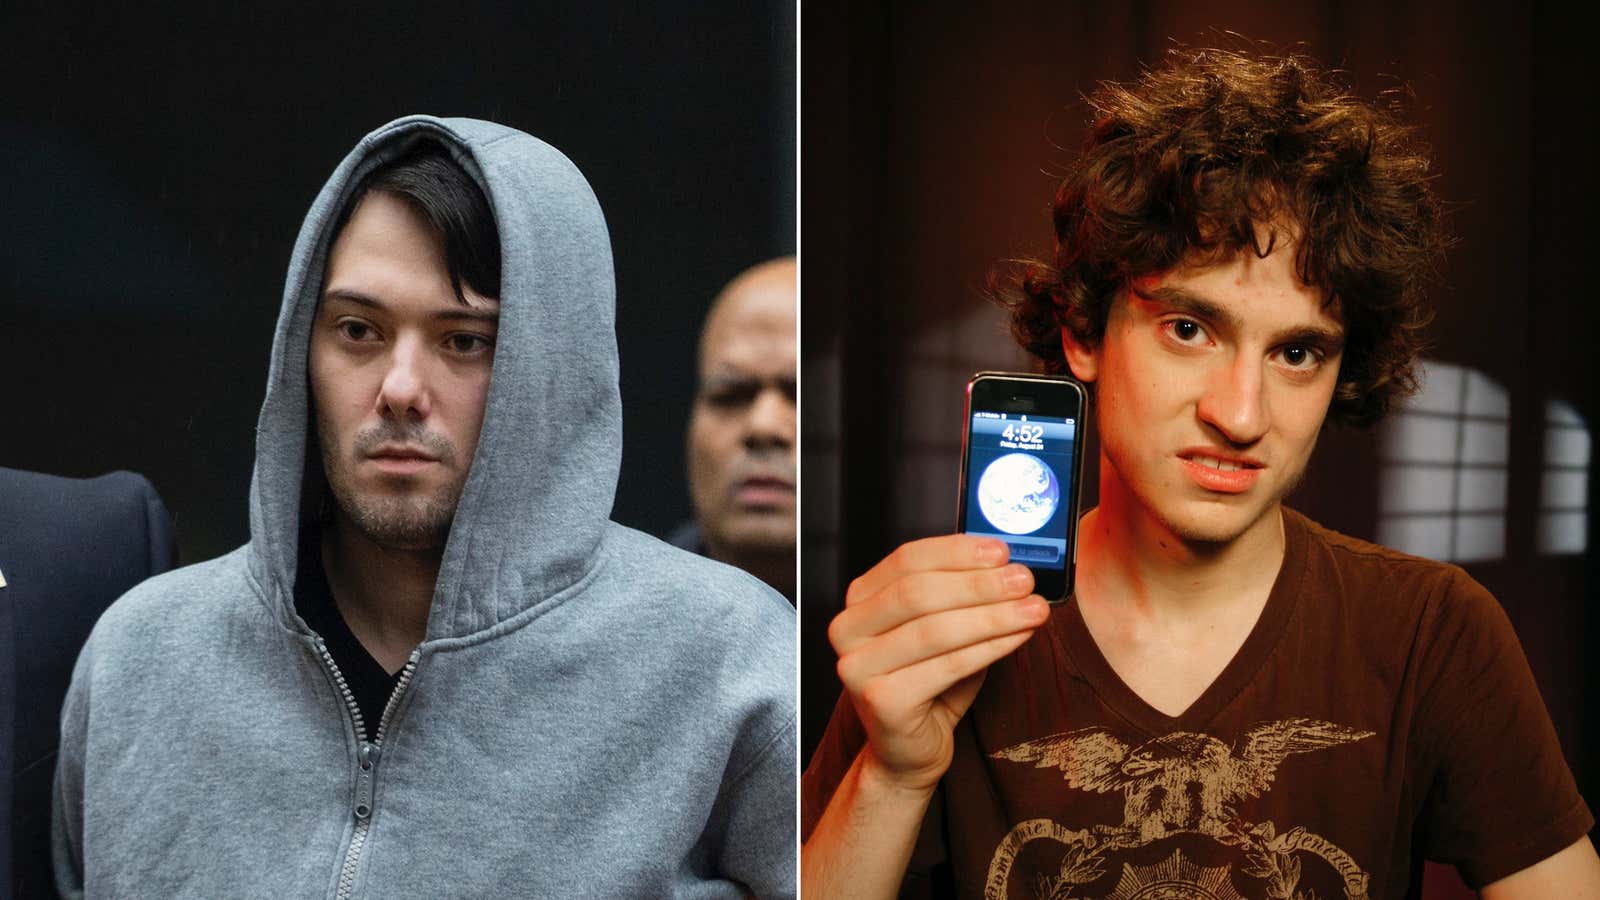 Martin Shkreli (left), on his arrest this week; George Hotz (right), in 2007, upon jailbreaking the iPhone.